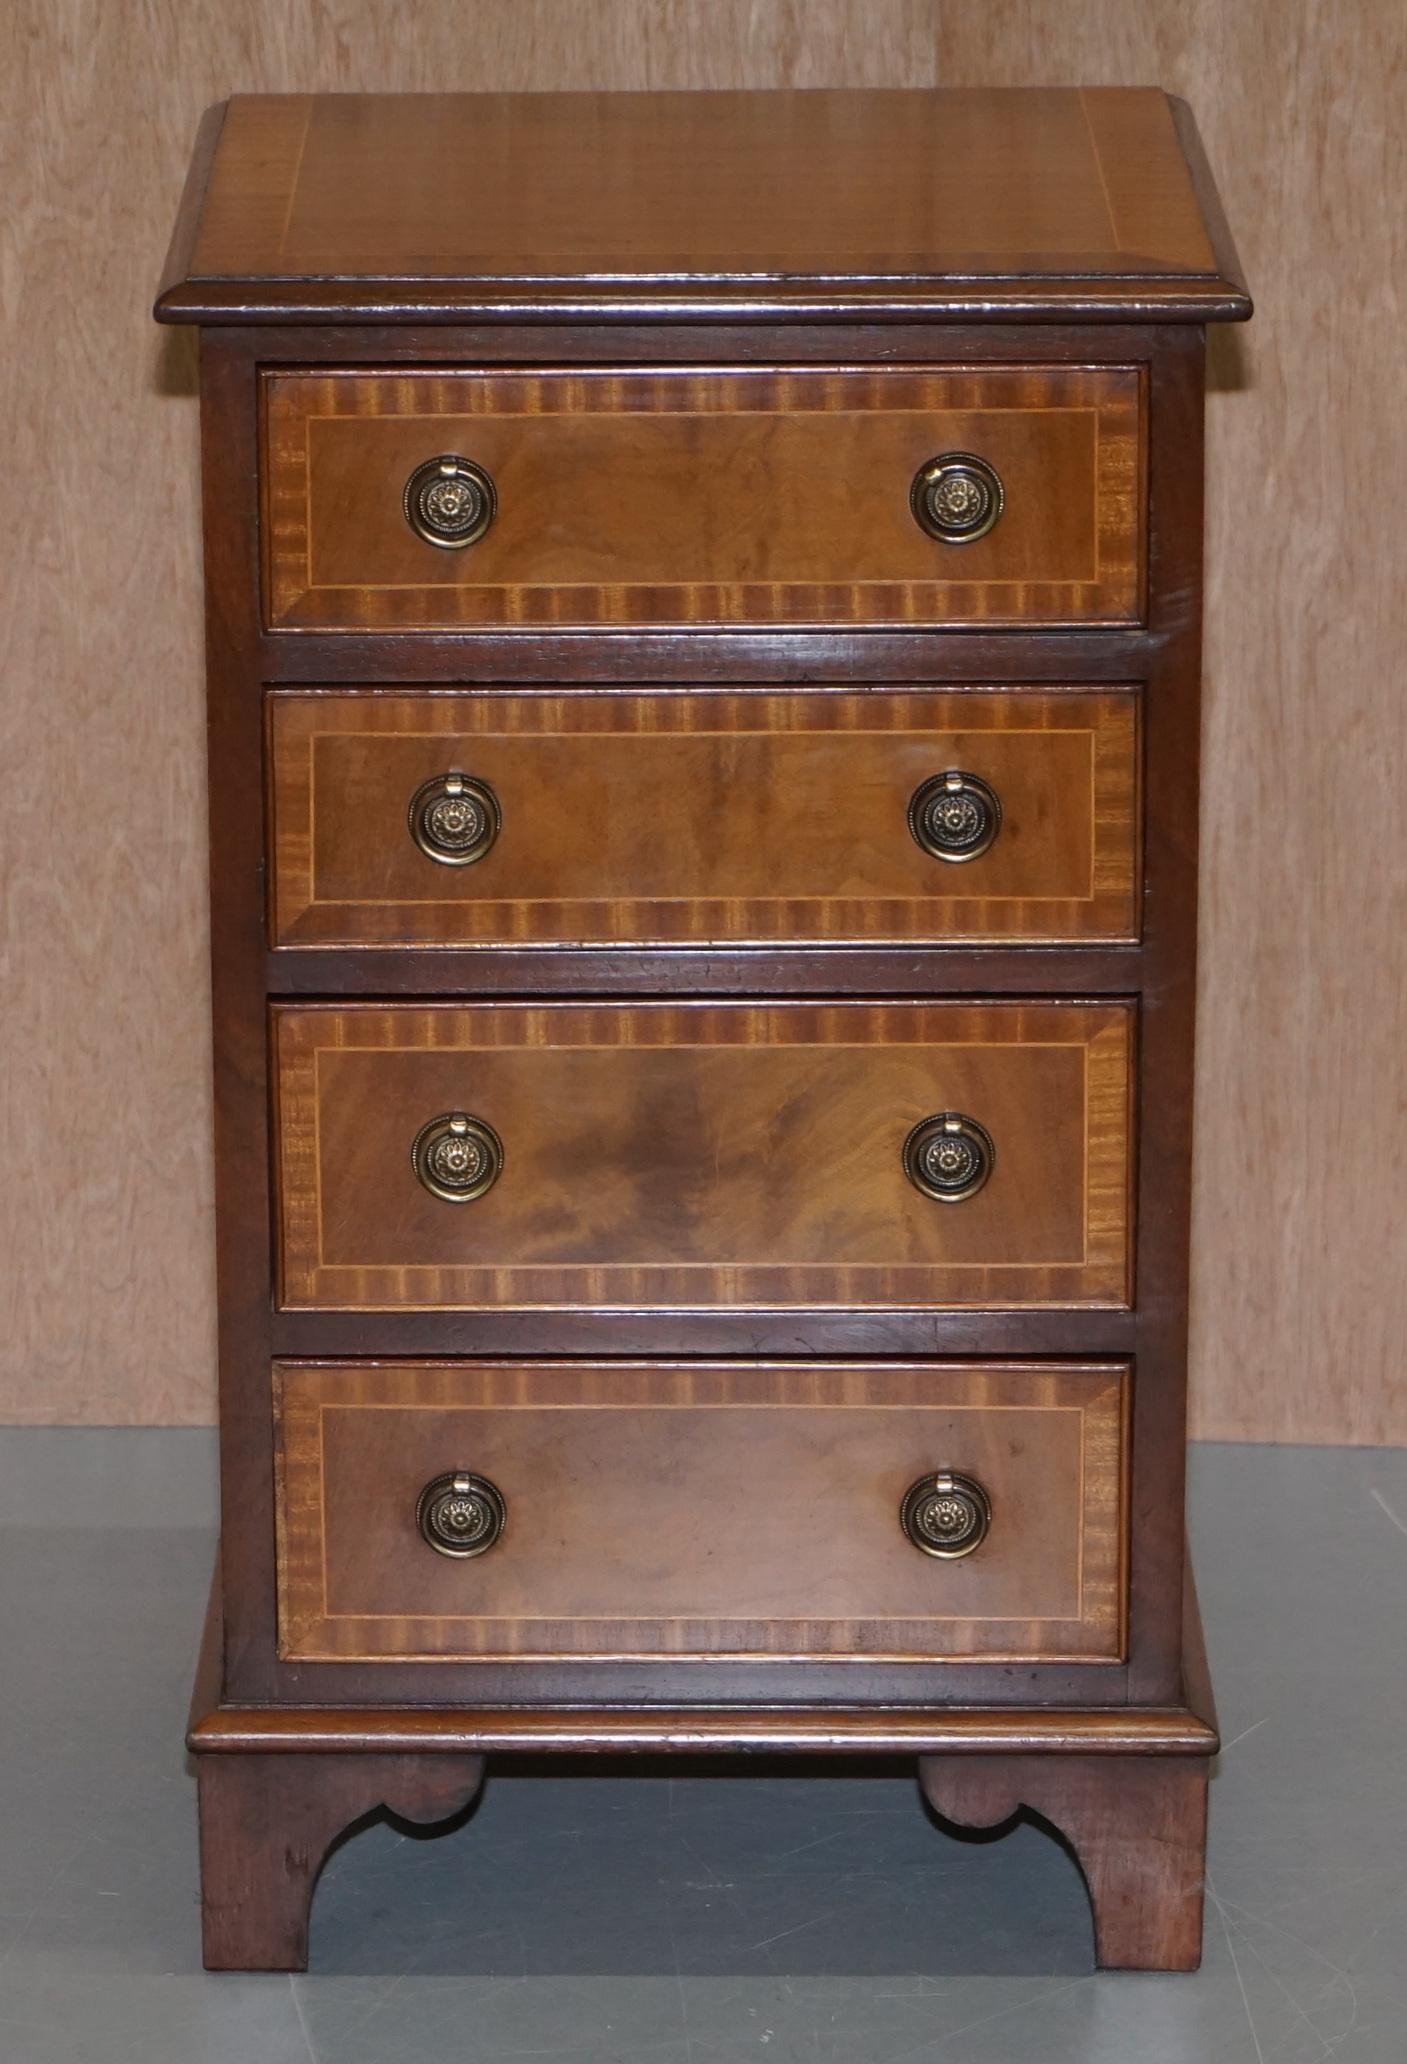 We are delighted to offer for sale this very nice vintage walnut and mahogany chest of drawers made in the Georgian style

A good looking and well made piece, its very versatile, I see it being used as a luxury lamp or wine table but naturally it